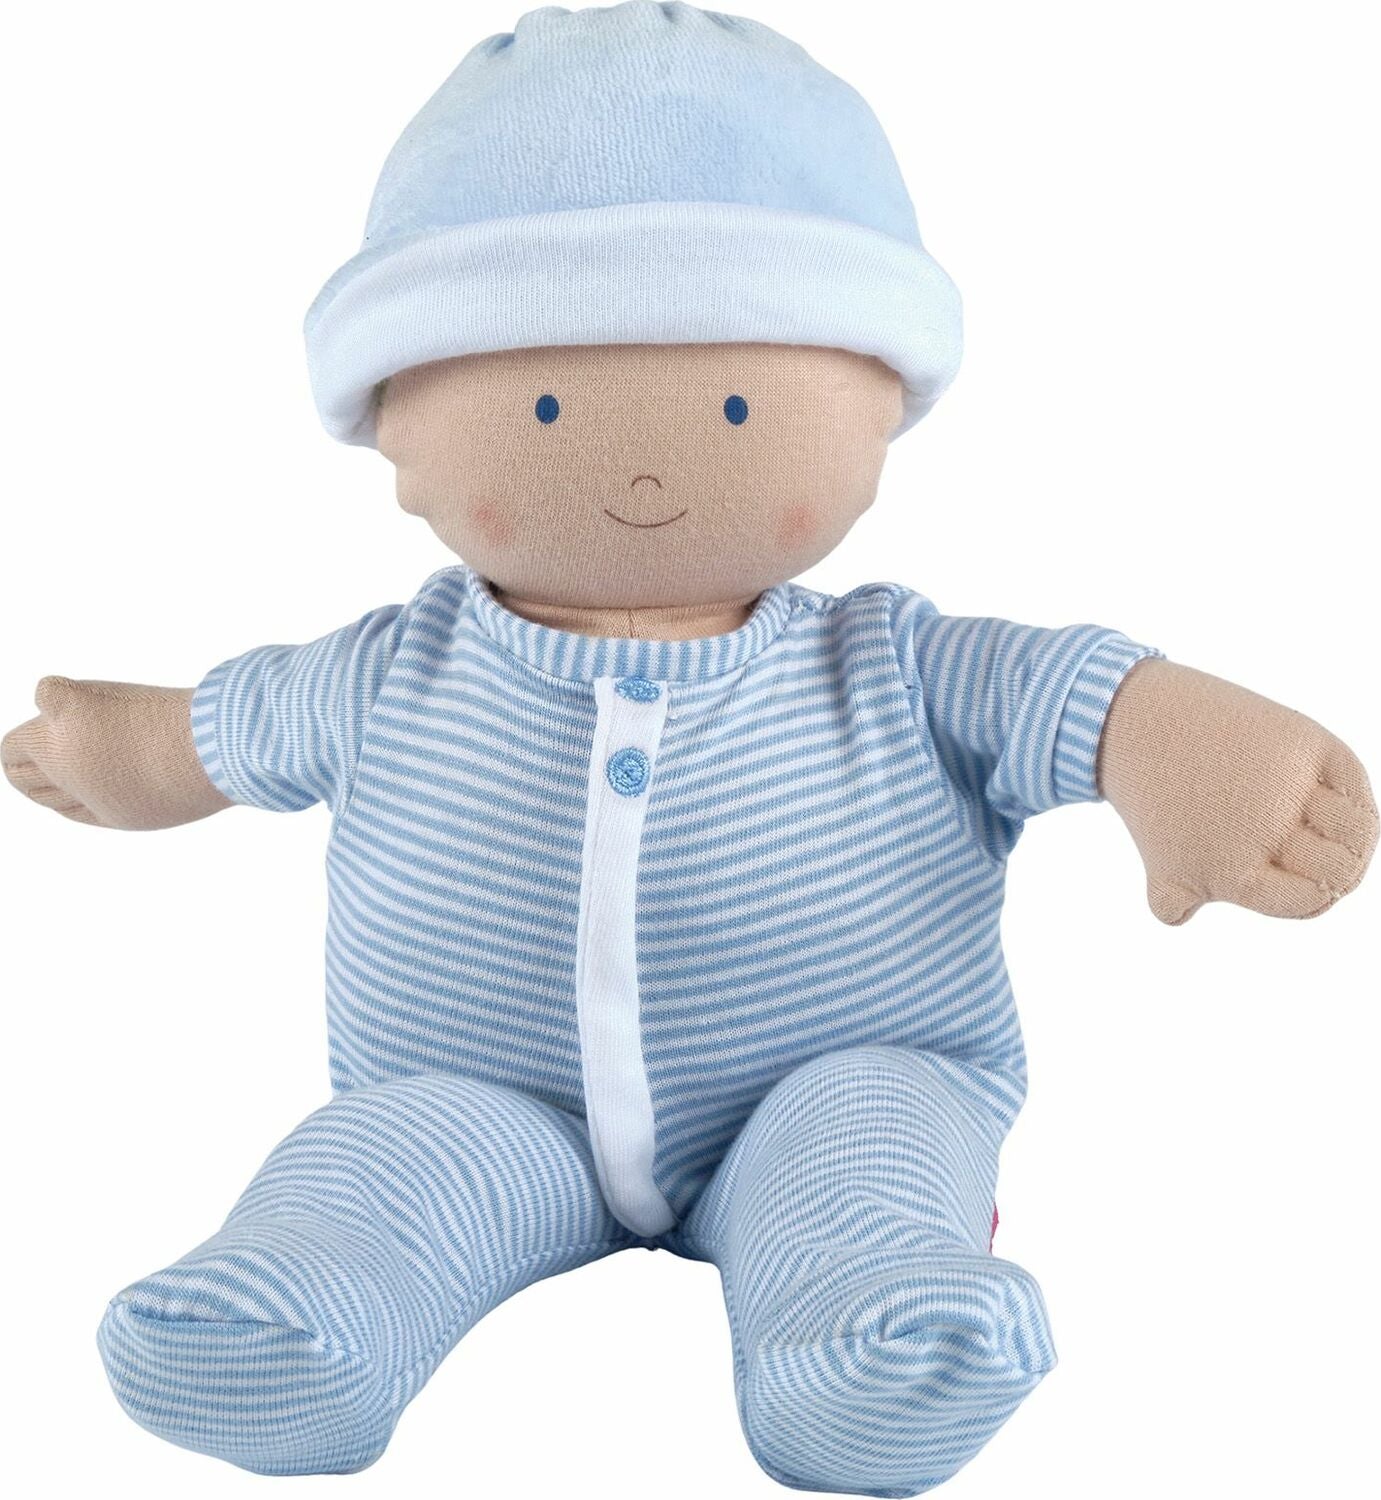 Cherub Baby Soft Doll in Blue Outfit